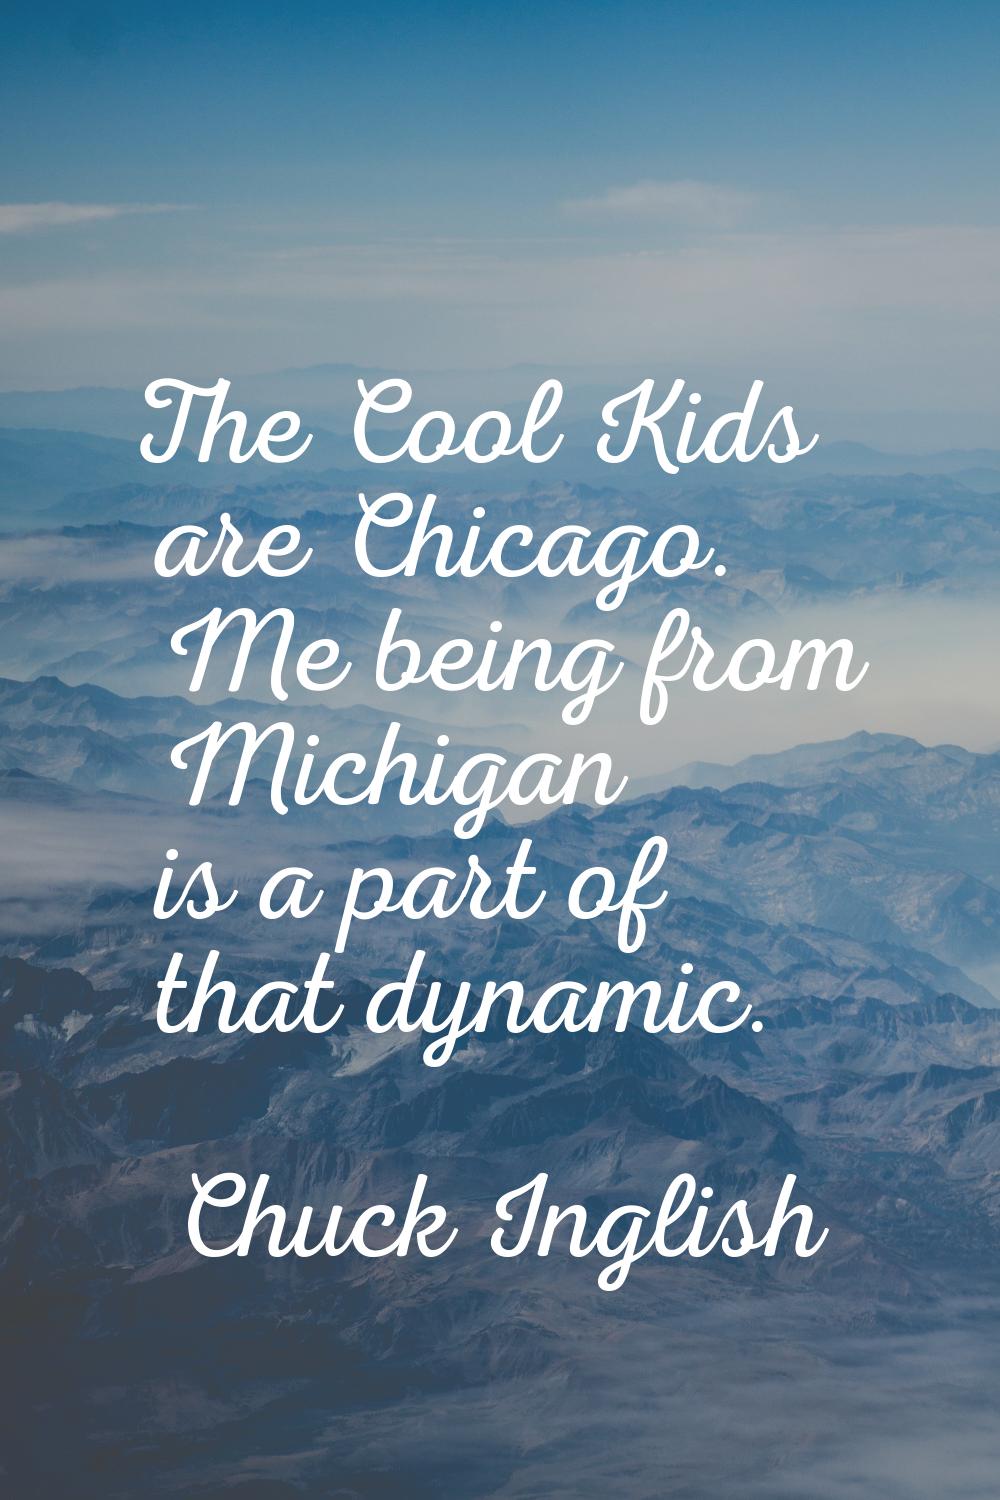 The Cool Kids are Chicago. Me being from Michigan is a part of that dynamic.